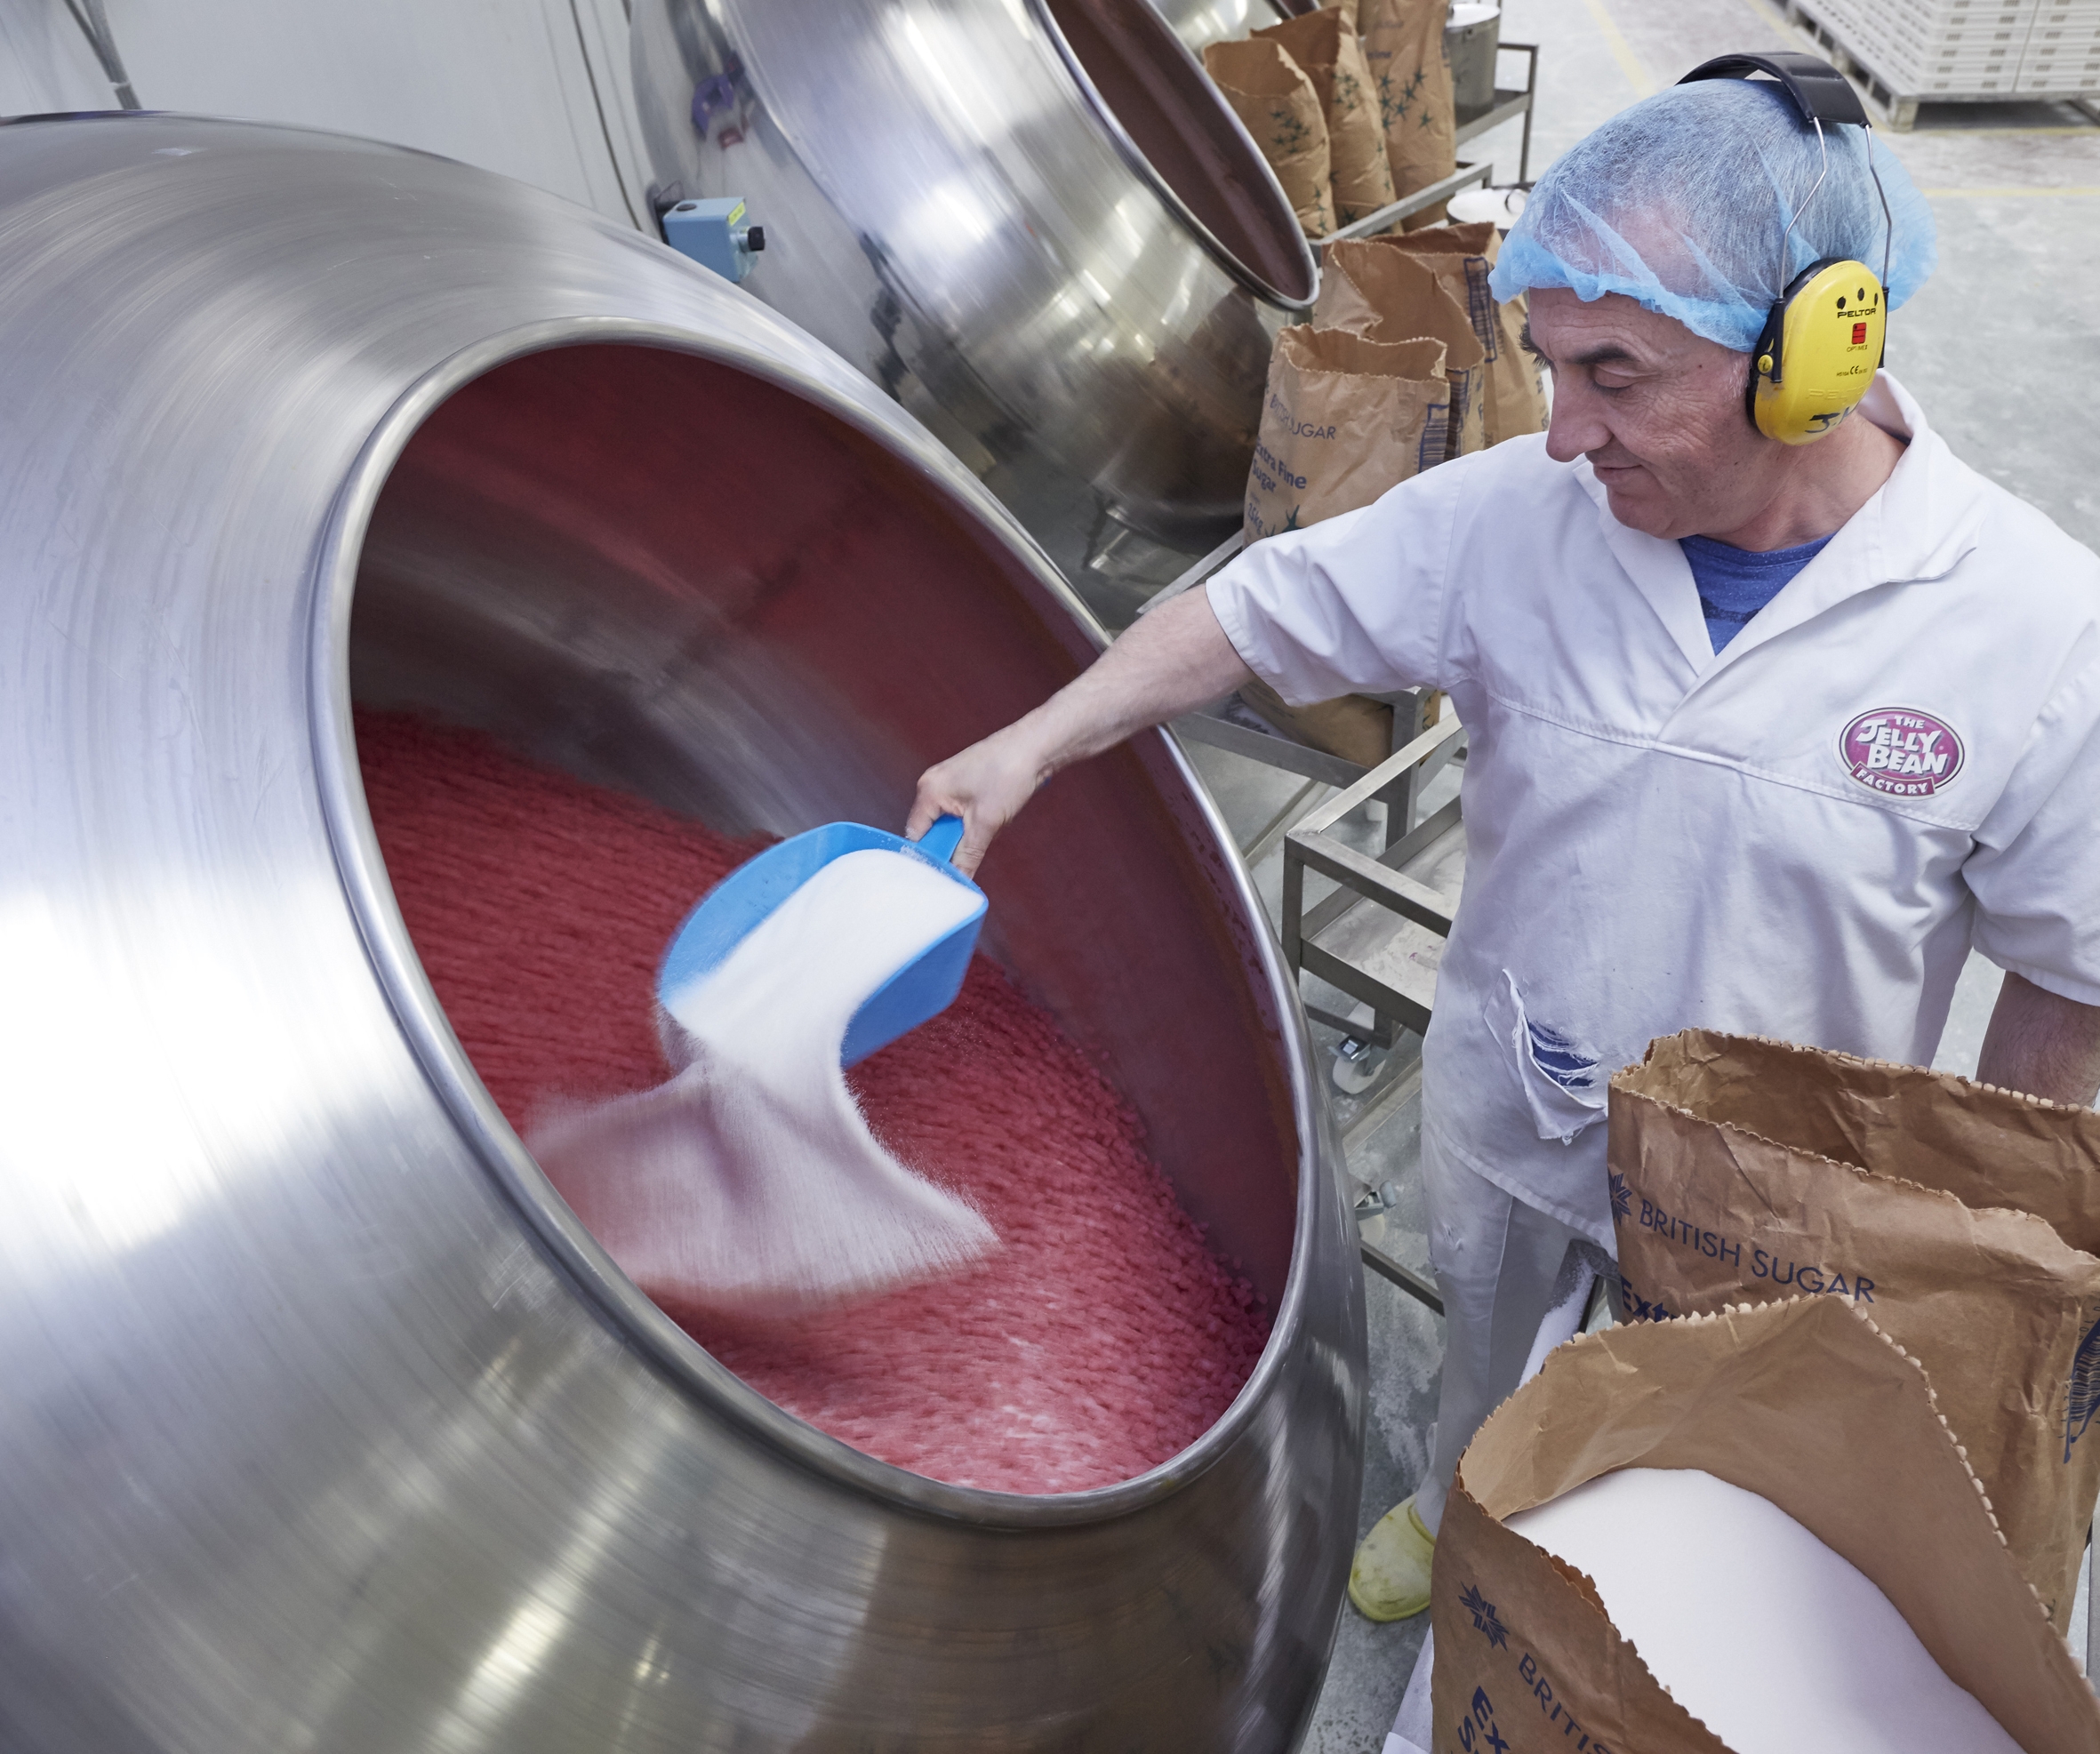 Photo of a man dressed in a white uniform scooping sugar at the food plant